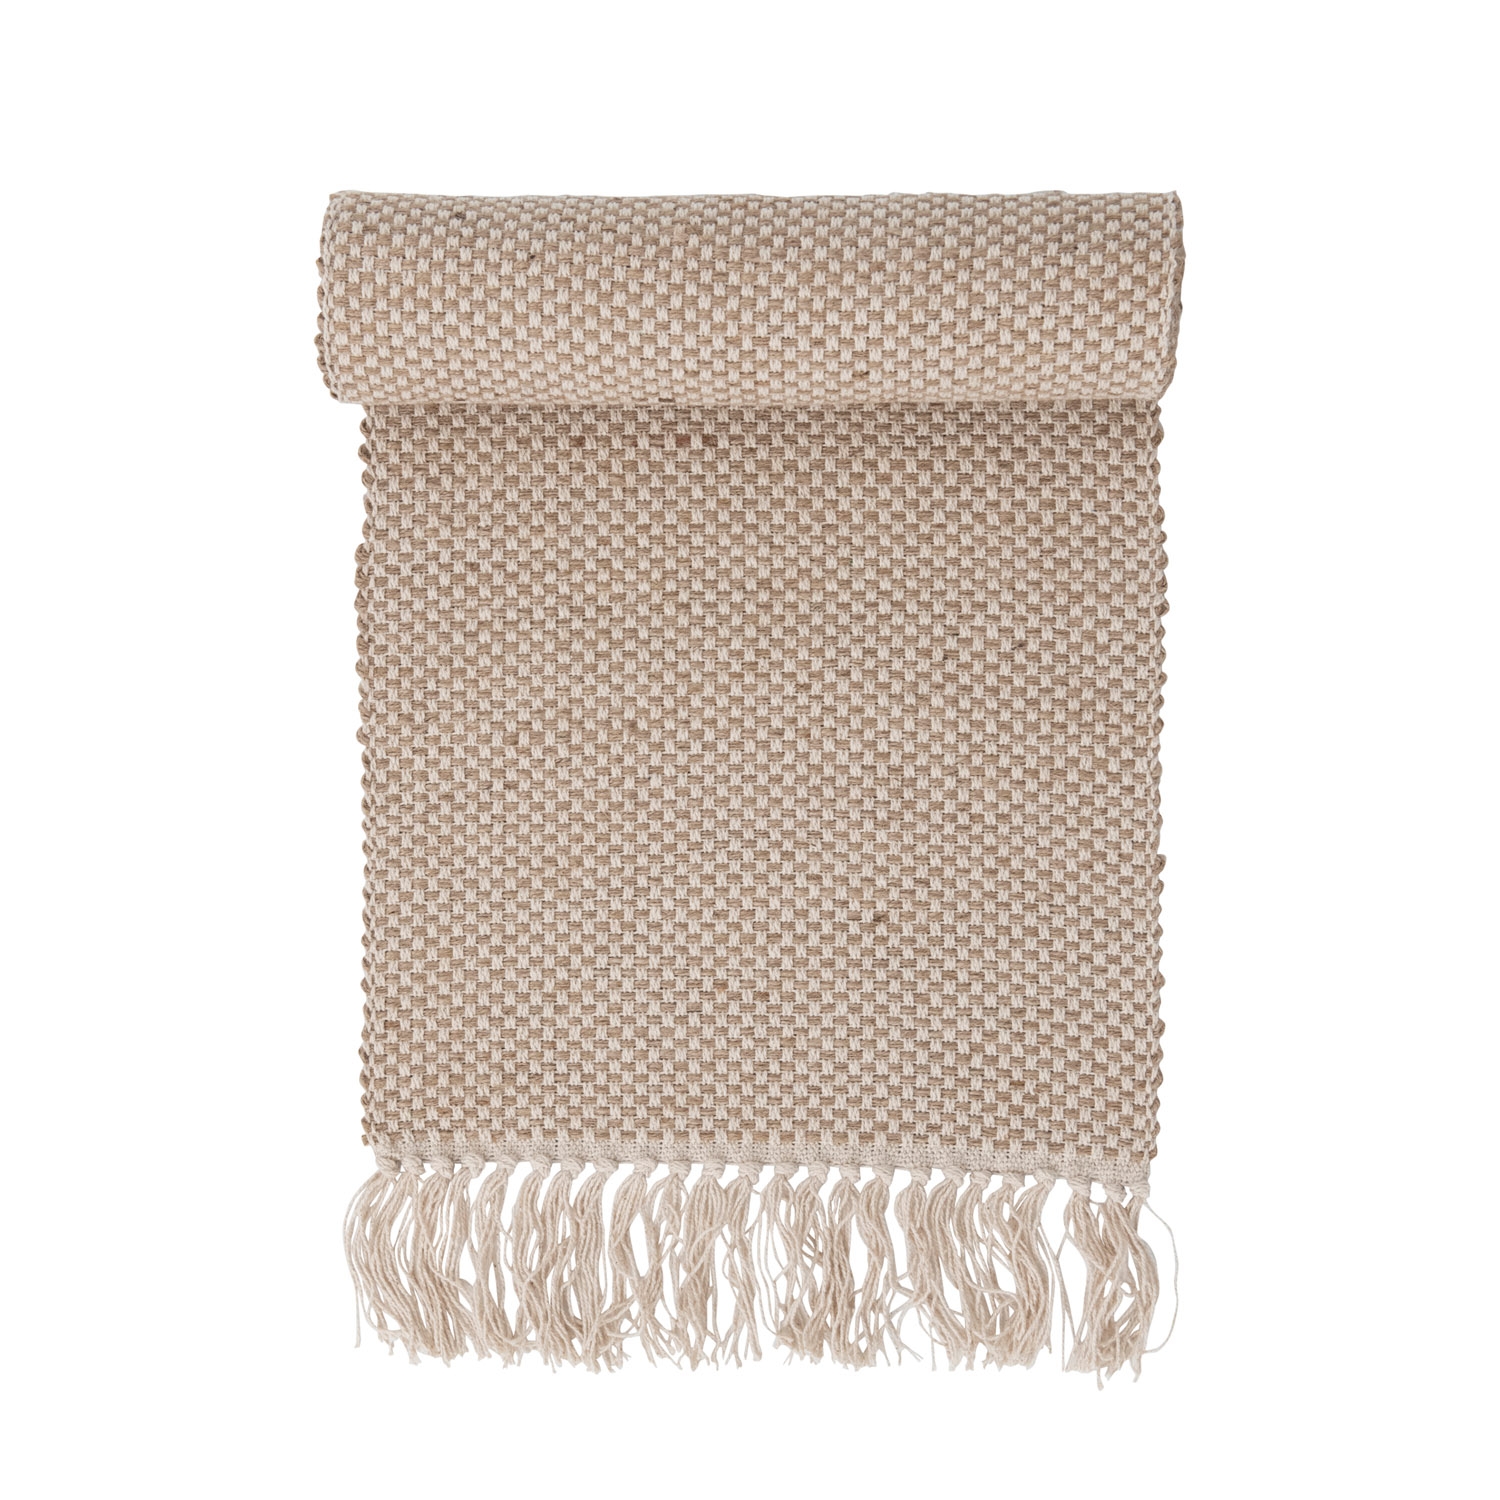 Woven Jute and Cotton Table Runner with Fringe - Image 0